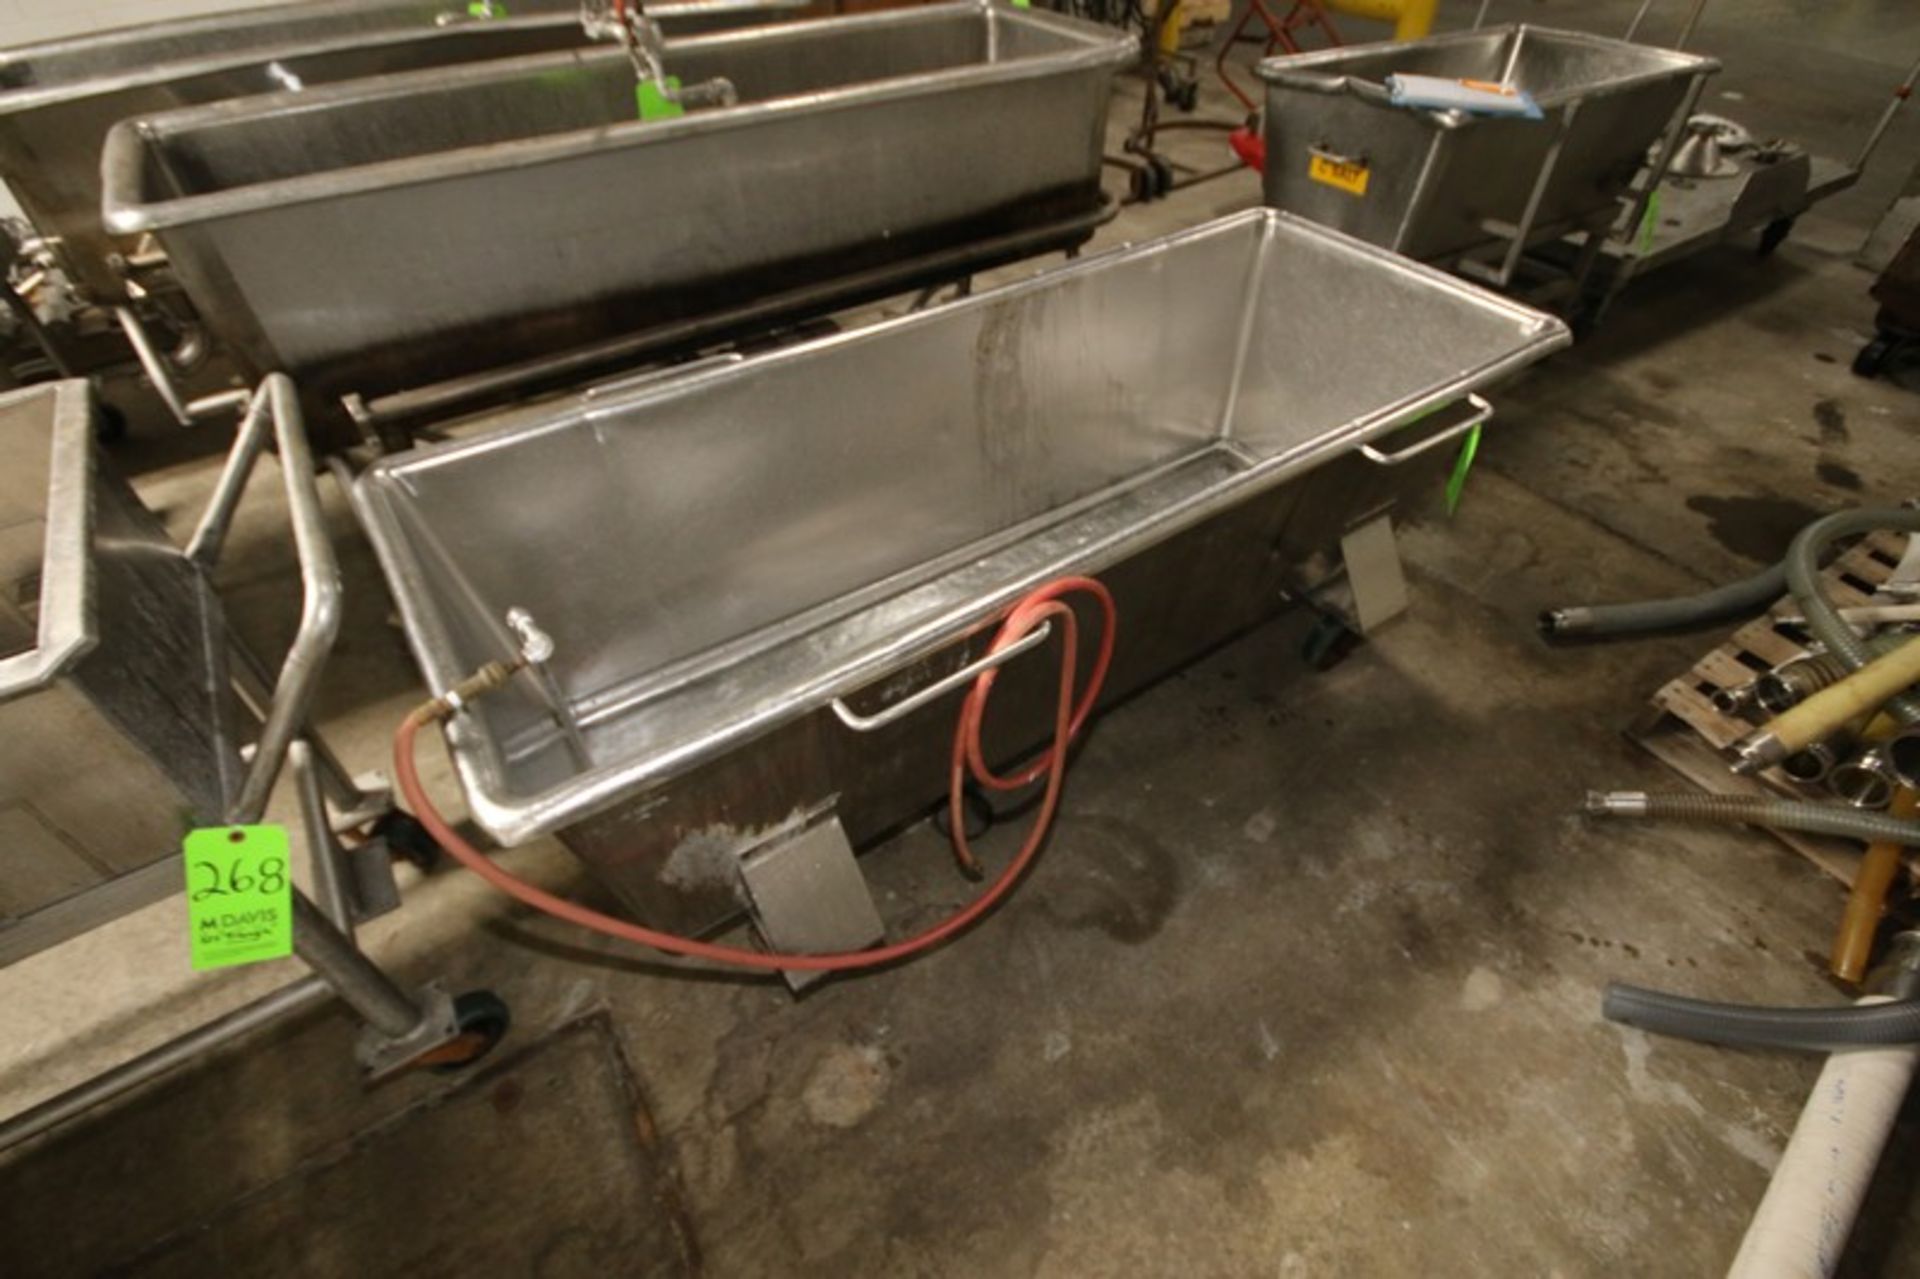 S/S Portable Trough, Internal Dims.: Aprox. 70-1/2" L x 25-1/2" W x 21" Deep, with Internal Pipe - Image 2 of 4